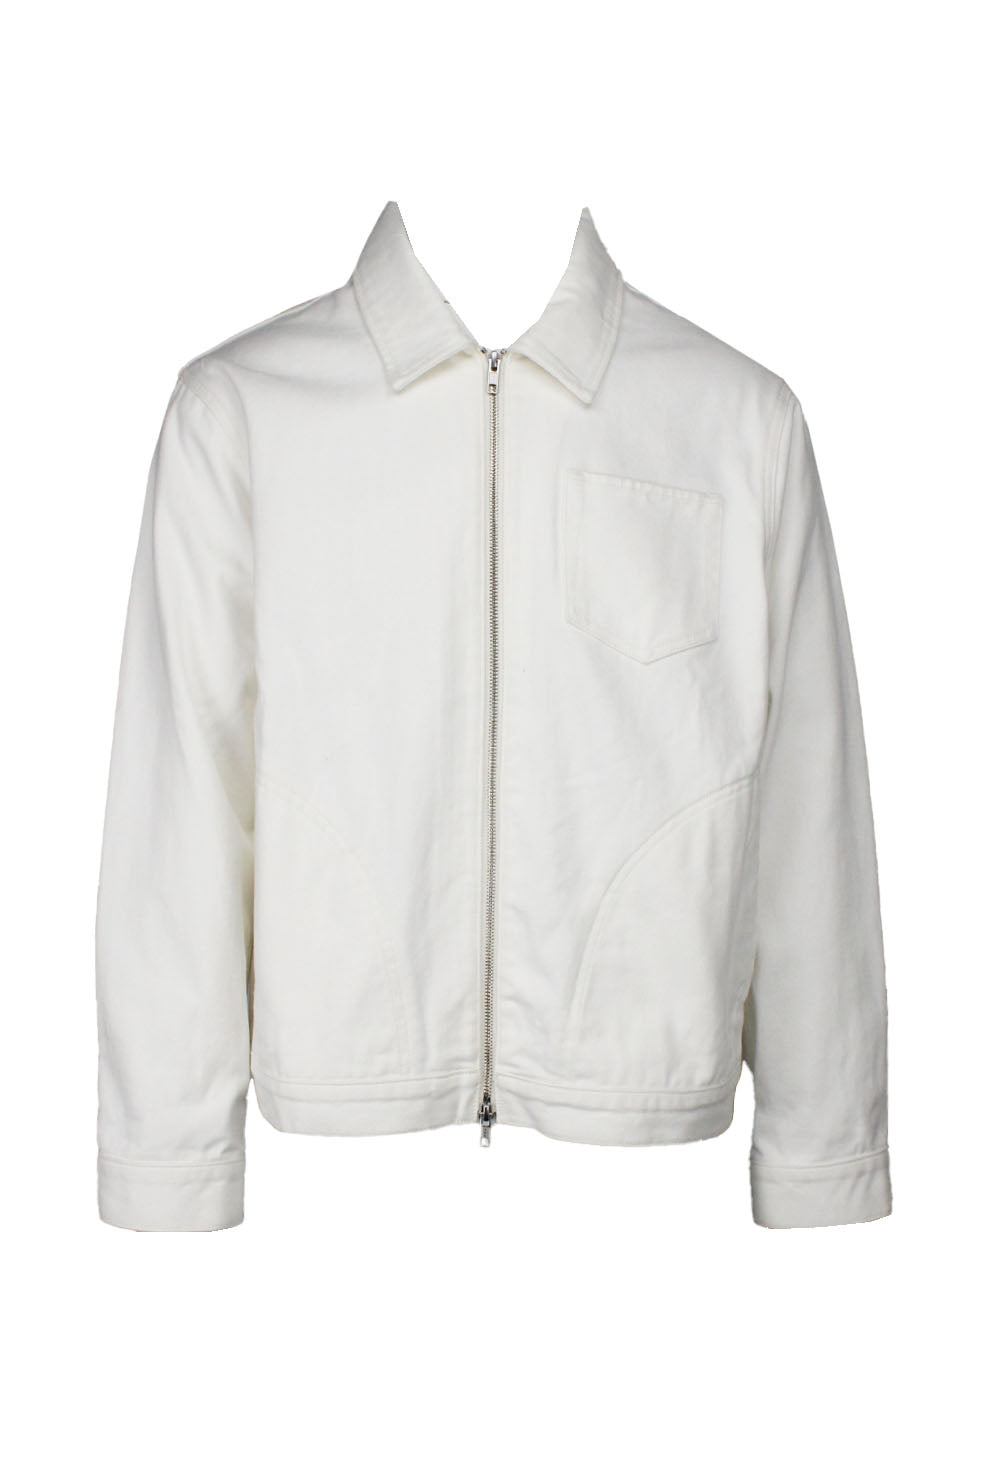 front view of kith white two way zip up denim jacket. features left breast pocket, side hand pockets, and buttons at sides of hem/cuffs.